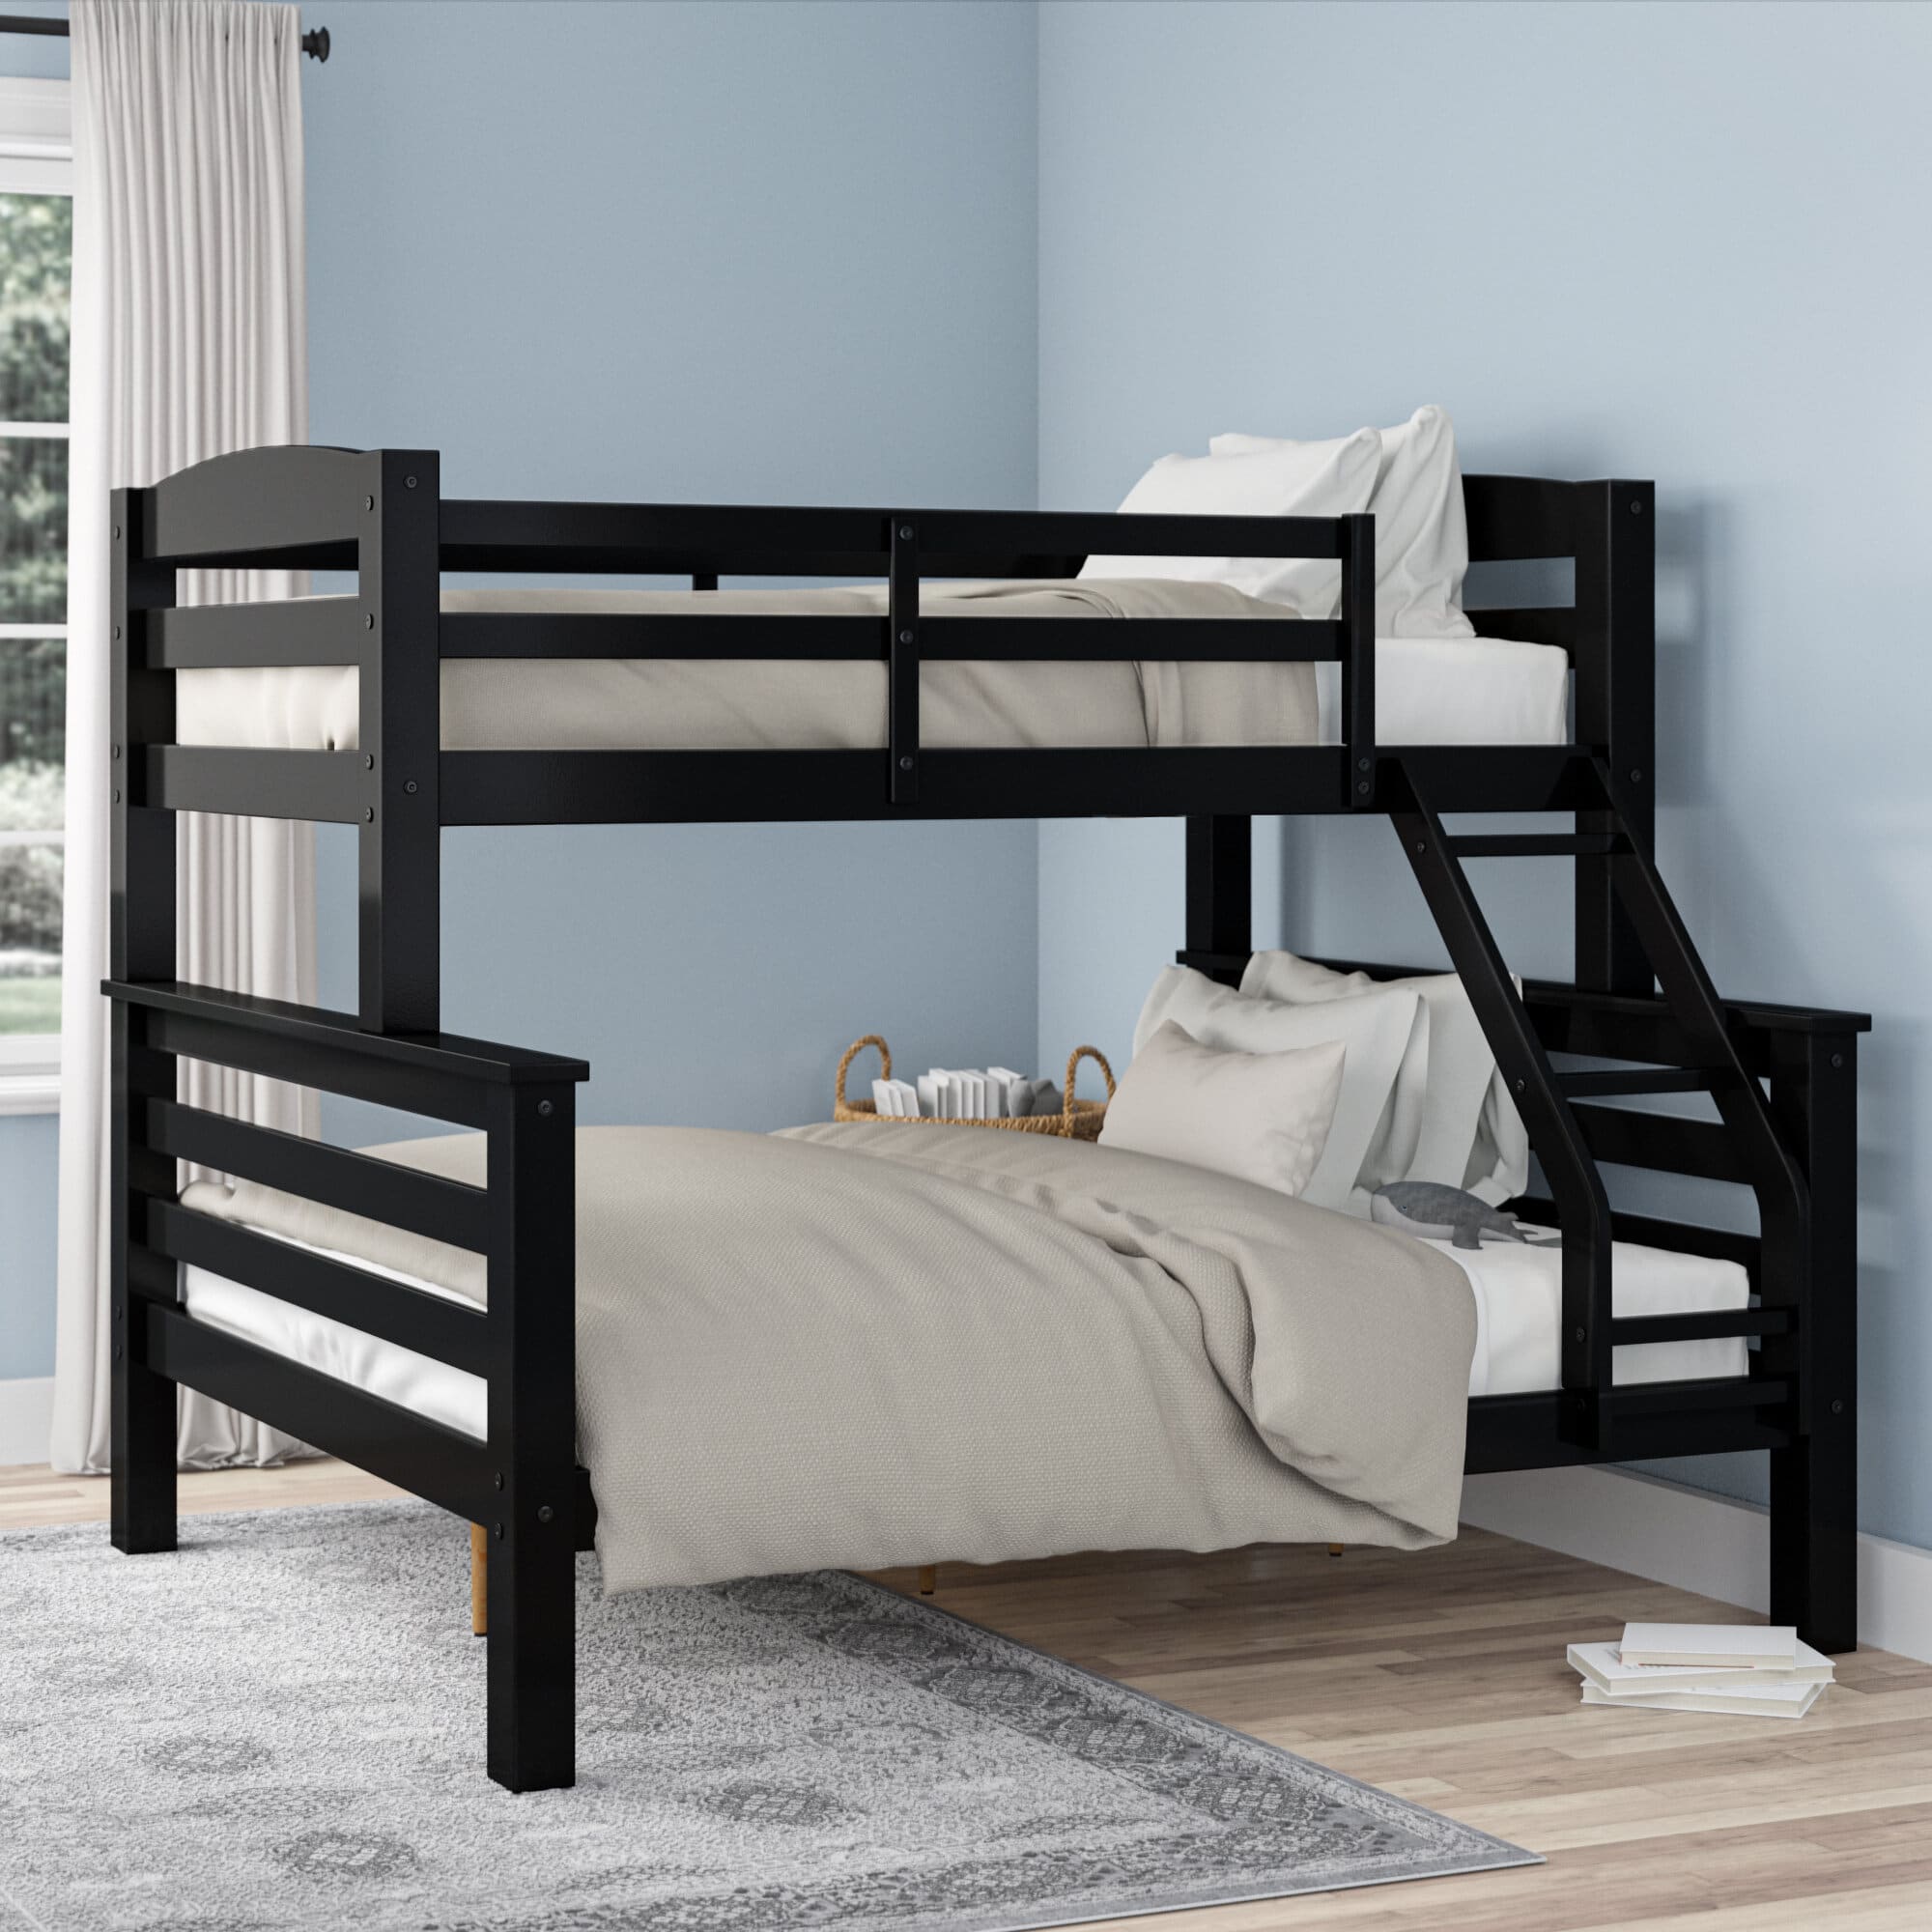 6 Best Twin Over Full Bunk Beds May, Twin Over Full Size Bunk Beds